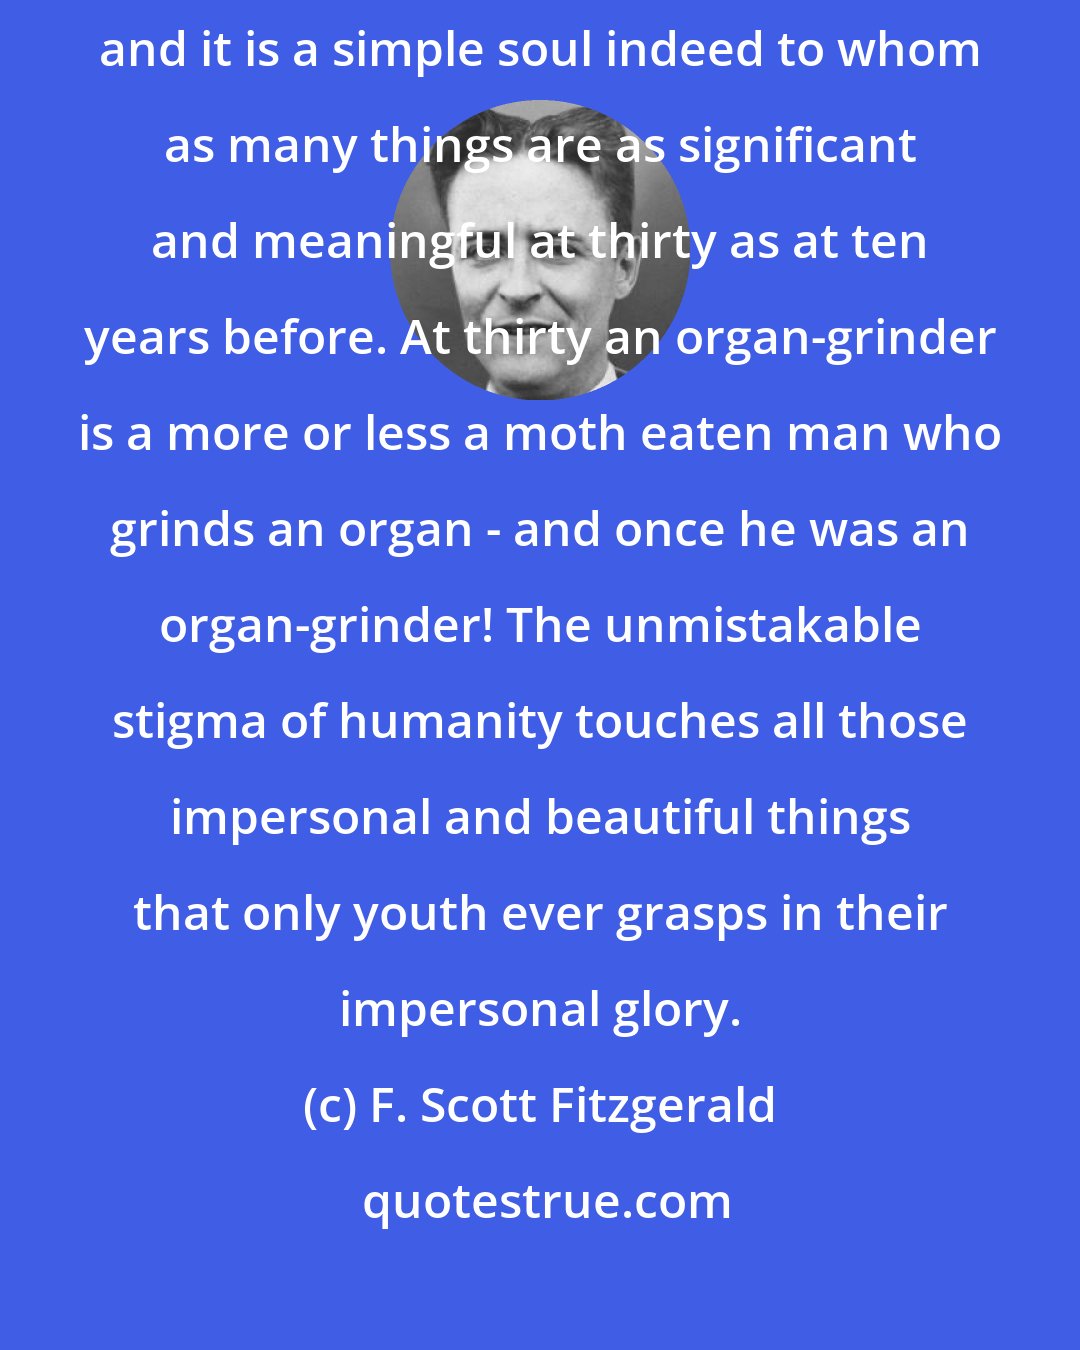 F. Scott Fitzgerald: It is in the twenties that the actual momentum of life begins to slacken, and it is a simple soul indeed to whom as many things are as significant and meaningful at thirty as at ten years before. At thirty an organ-grinder is a more or less a moth eaten man who grinds an organ - and once he was an organ-grinder! The unmistakable stigma of humanity touches all those impersonal and beautiful things that only youth ever grasps in their impersonal glory.